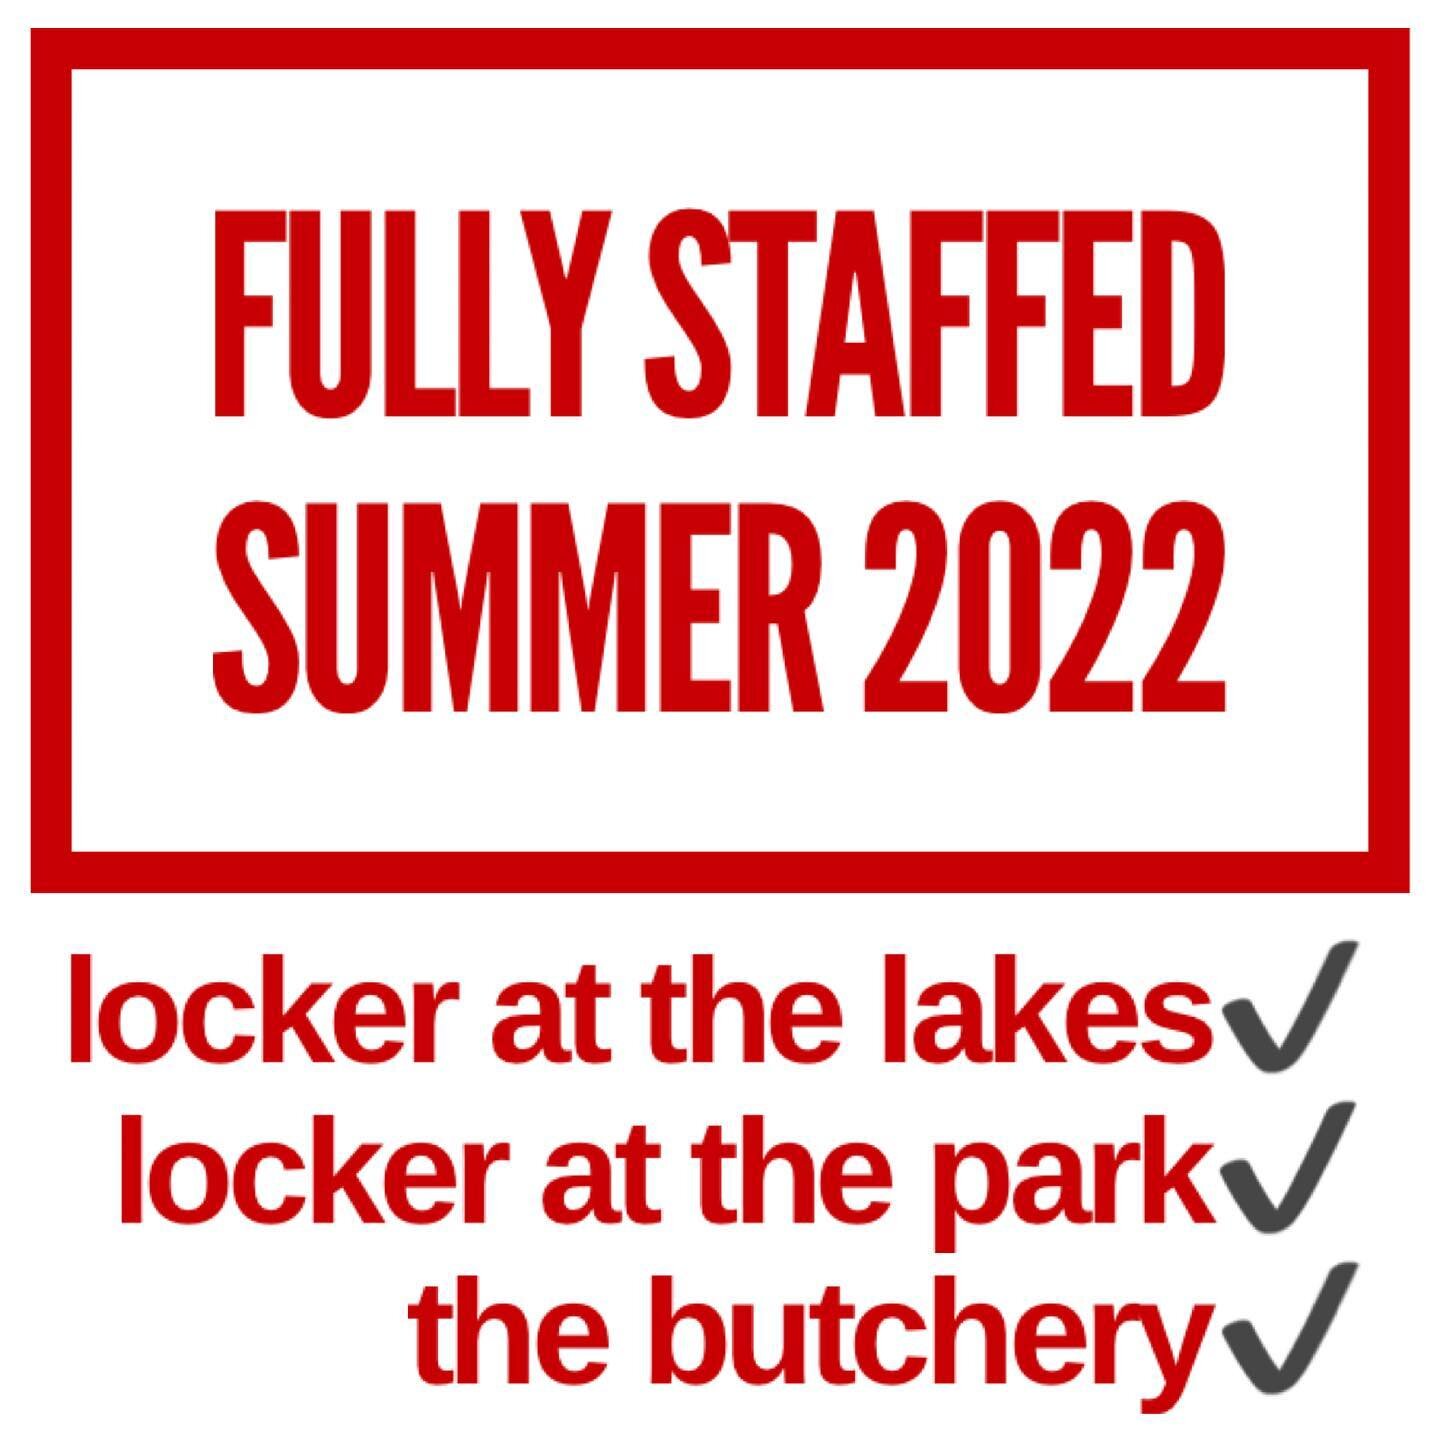 #BestTeam  If you want to come work for us, don&rsquo;t let this post discourage you from applying. We are always reviewing applications. If you&rsquo;re looking for a cool career in Butchery - come see us. #SoYouWantToBeAButcher